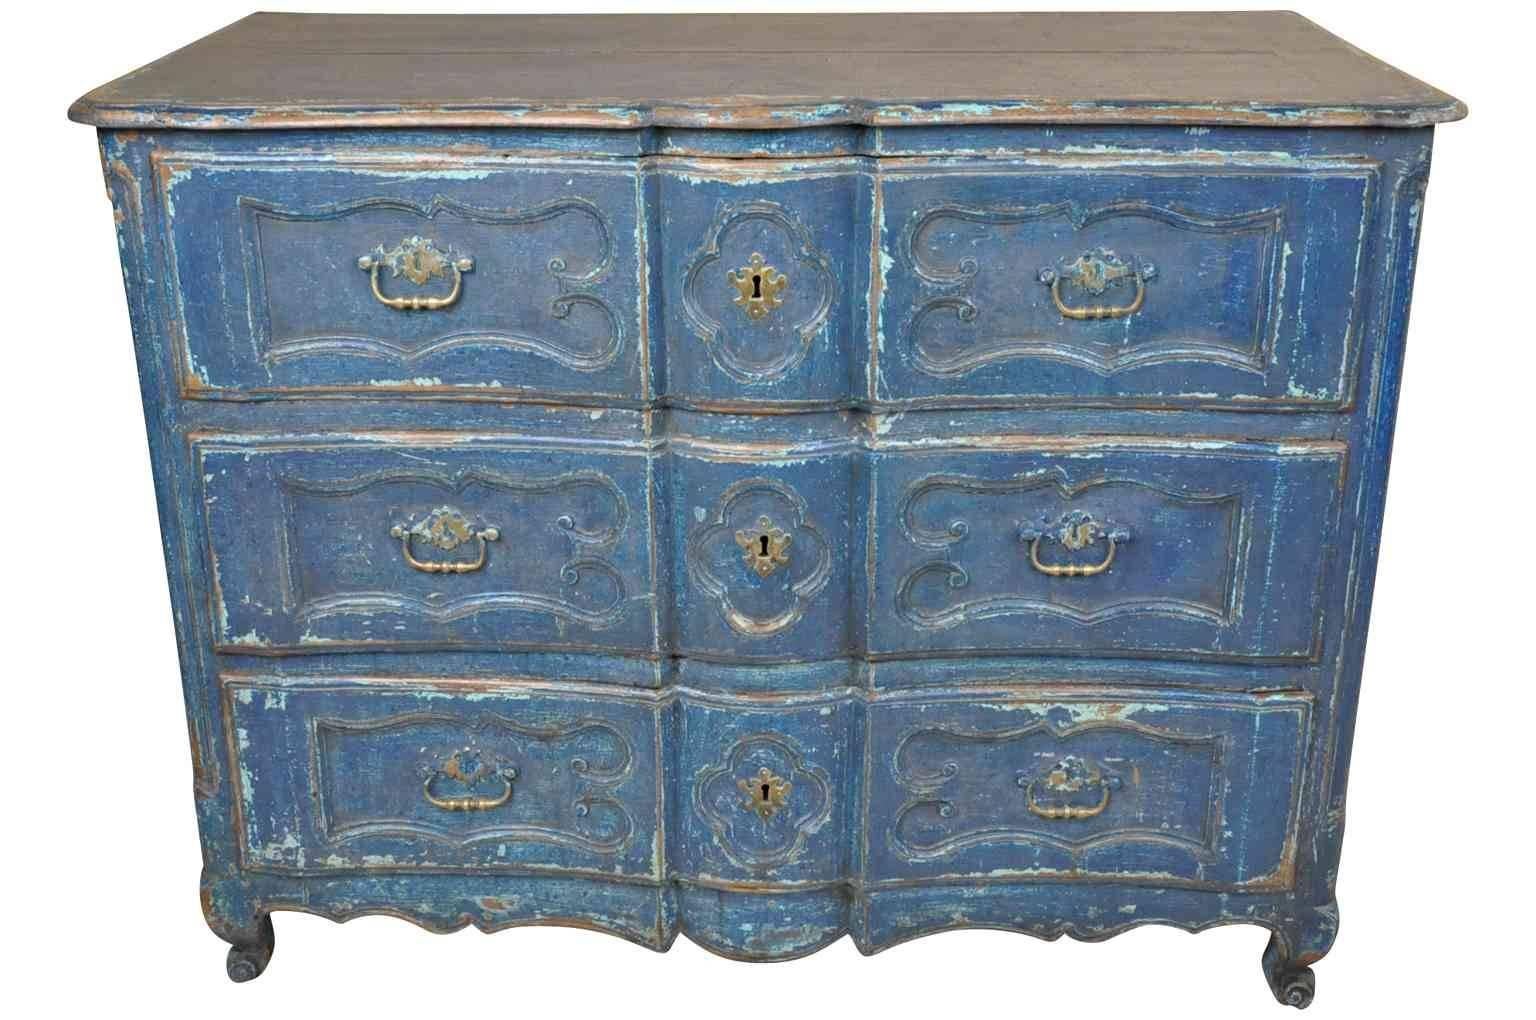 A French provencal 18th century commode in the arbalete form. Soundly constructed in painted wood with three drawers and a cabriole feet. A wonderful patina and painted finish. This piece would also be terrific converted into a bathroom or powder